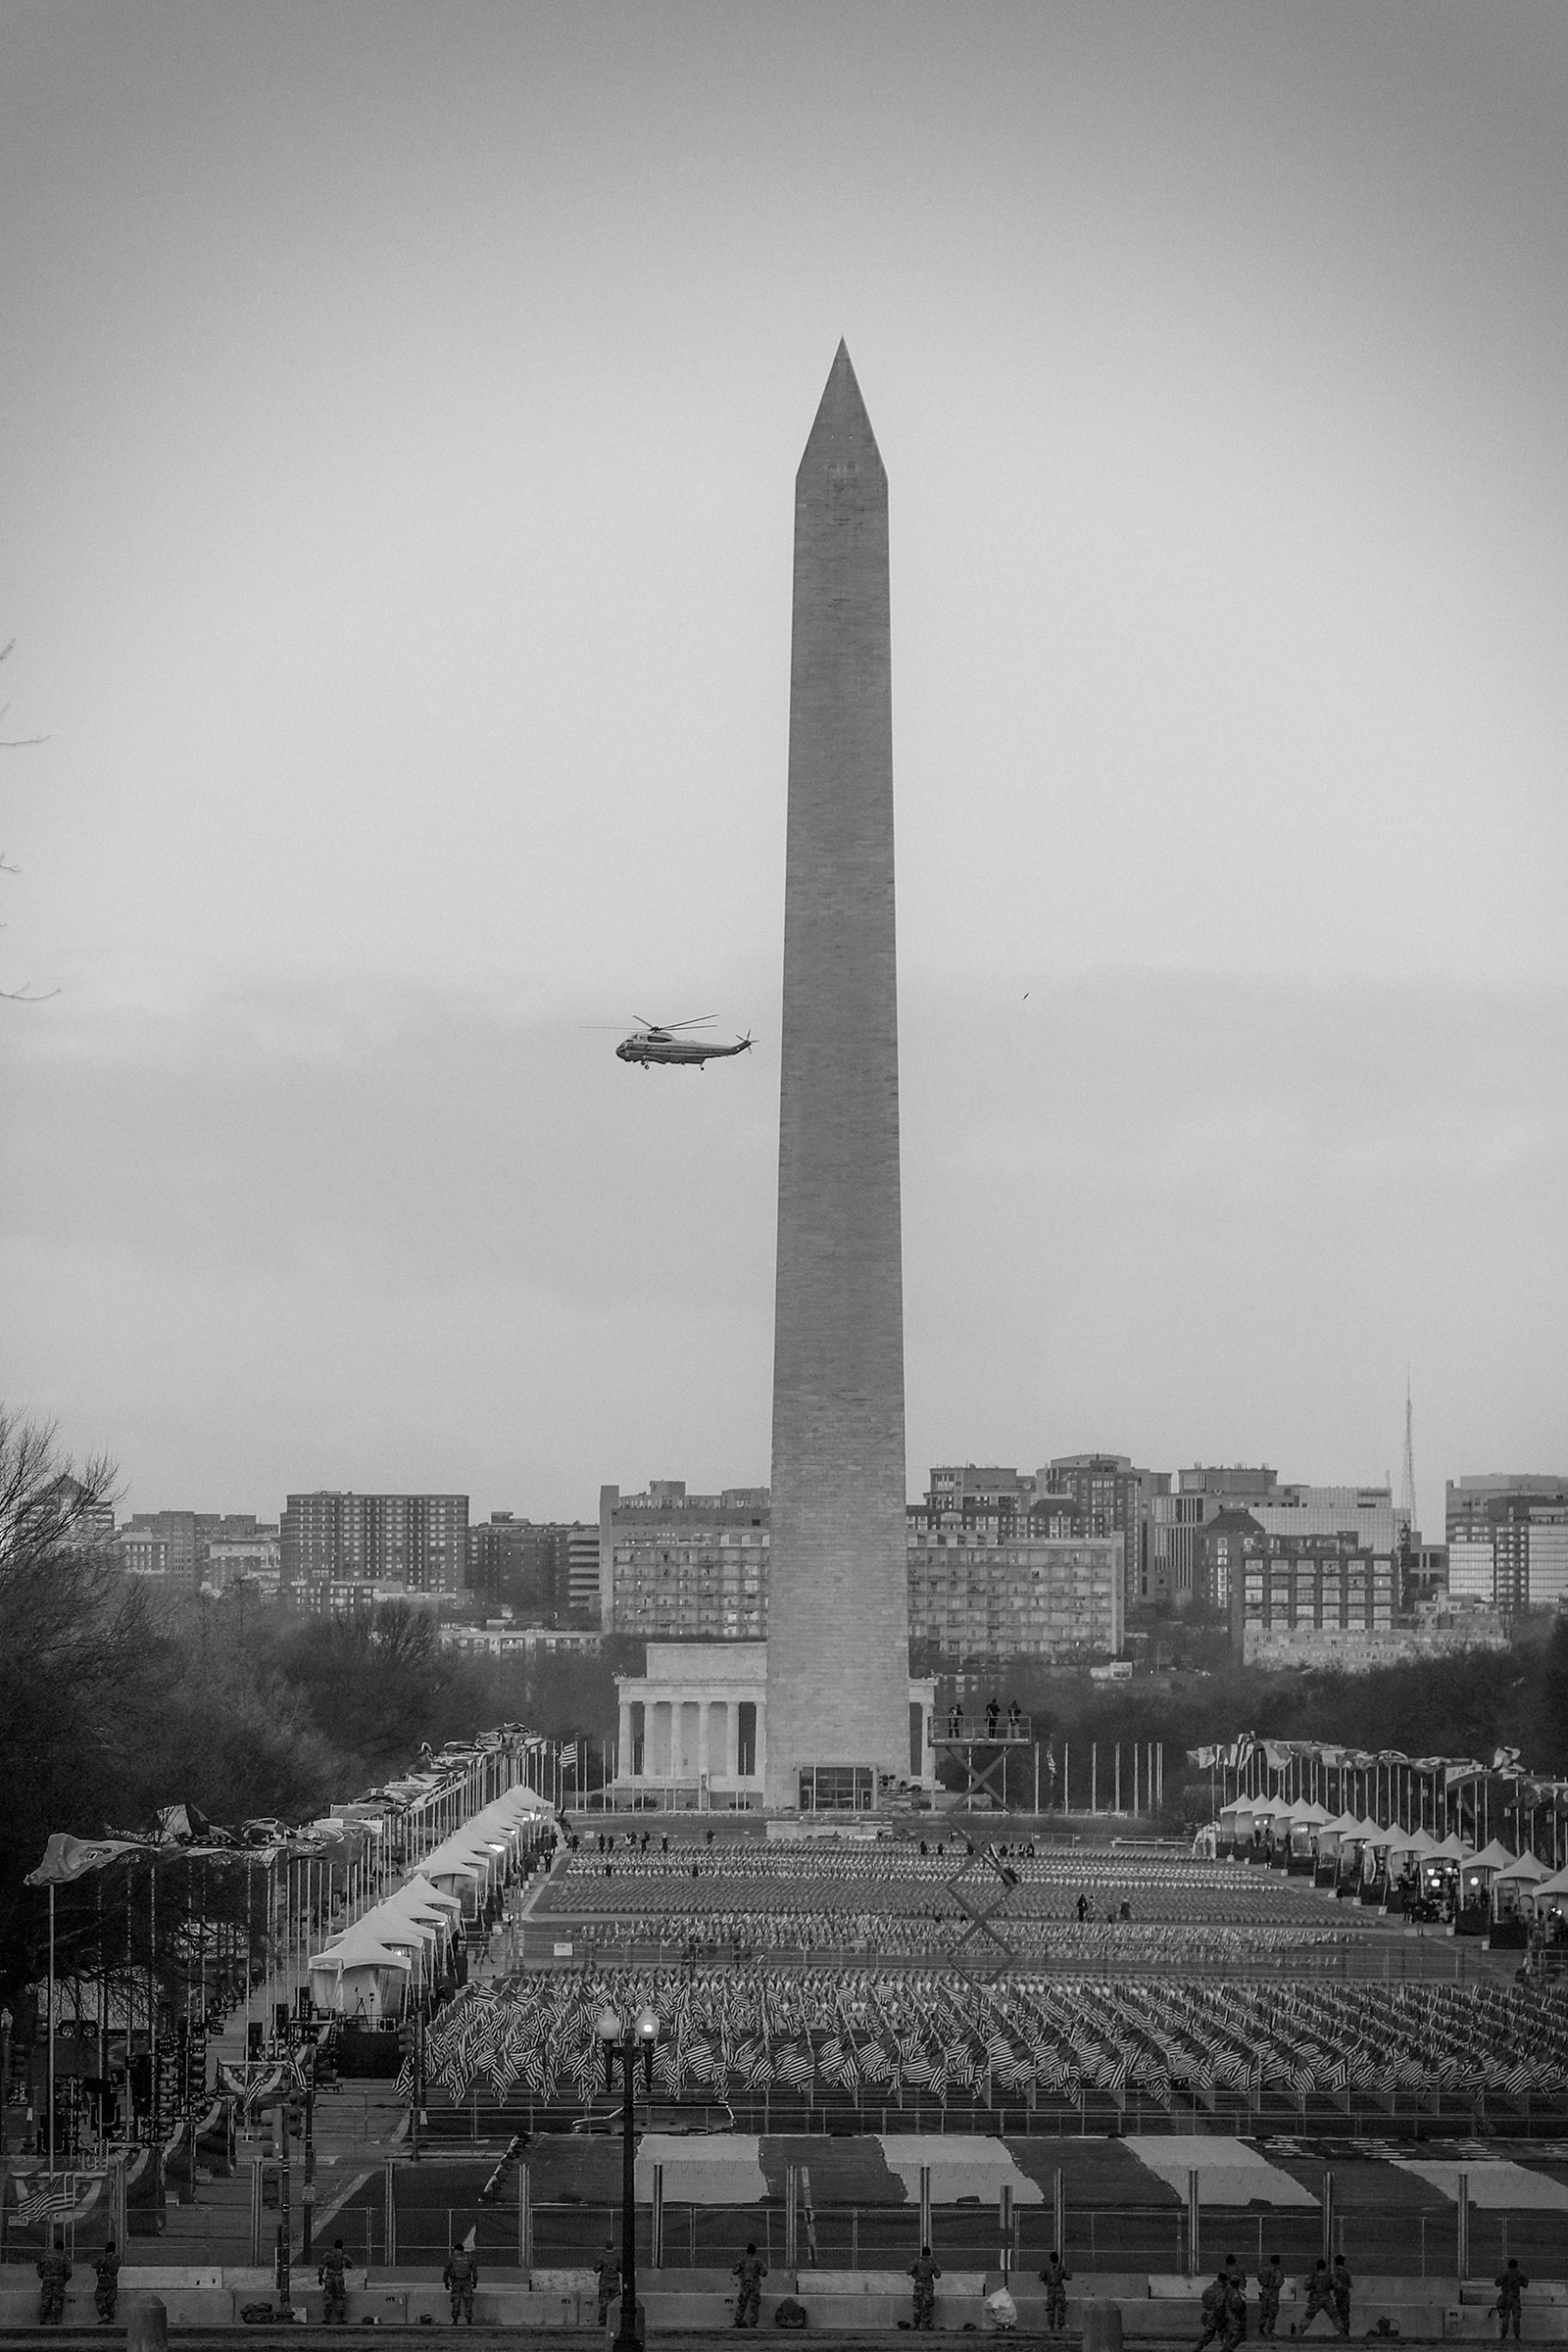 Marine One circles the National Mall carrying Donald Trump as he departs the White House ahead of the inauguration. (Philip Montgomery for TIME)